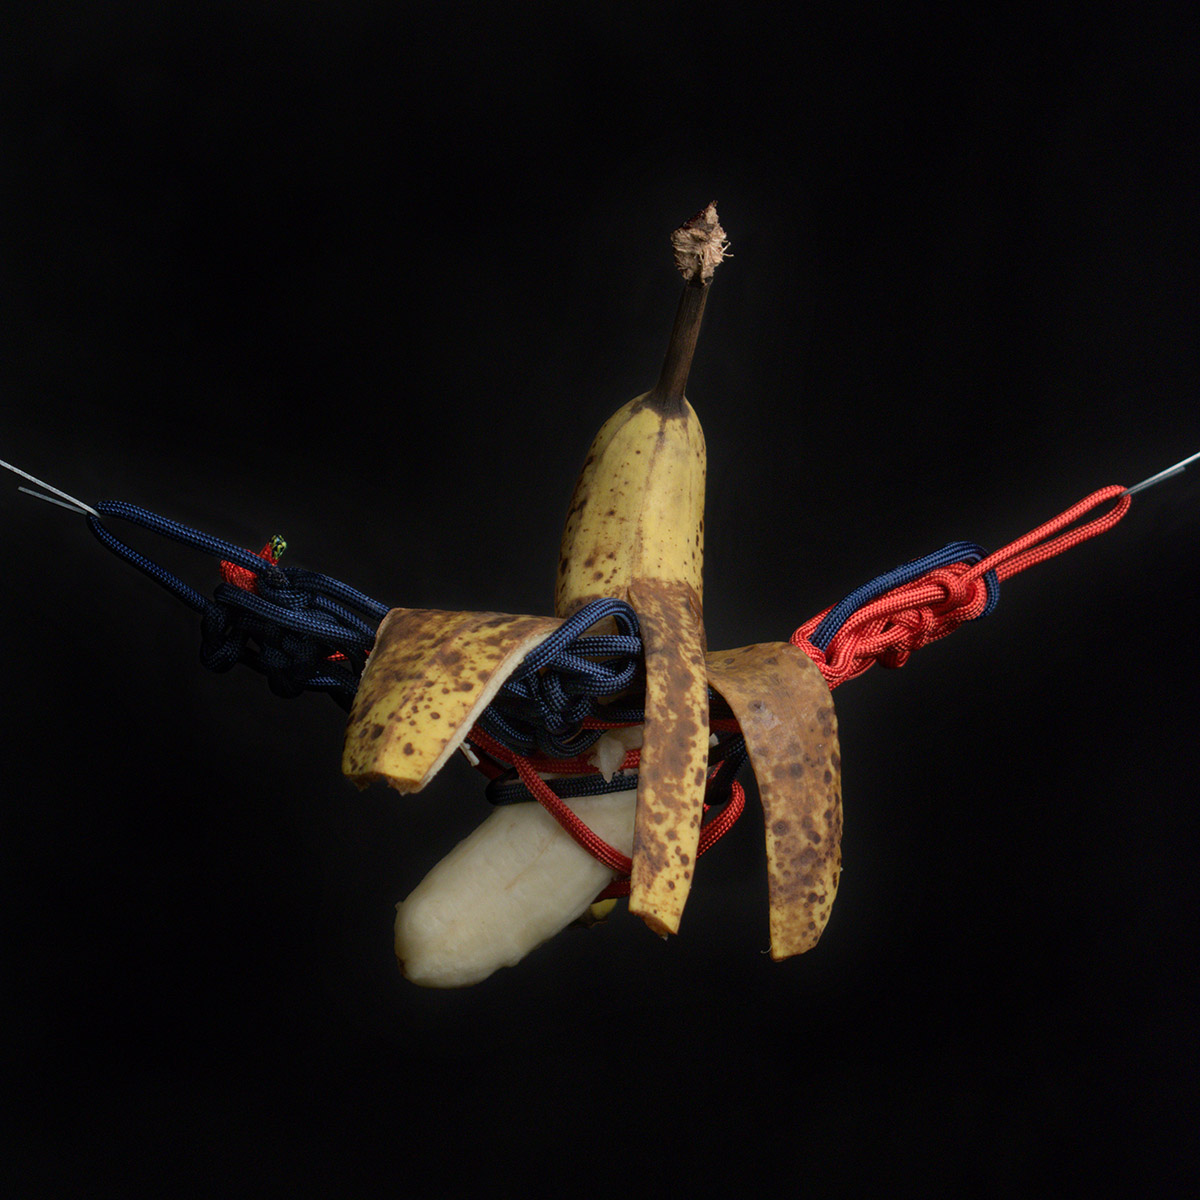 A banana partially peeled and bent at an odd angle, suspended by knotted red and blue rope in front of a black background.